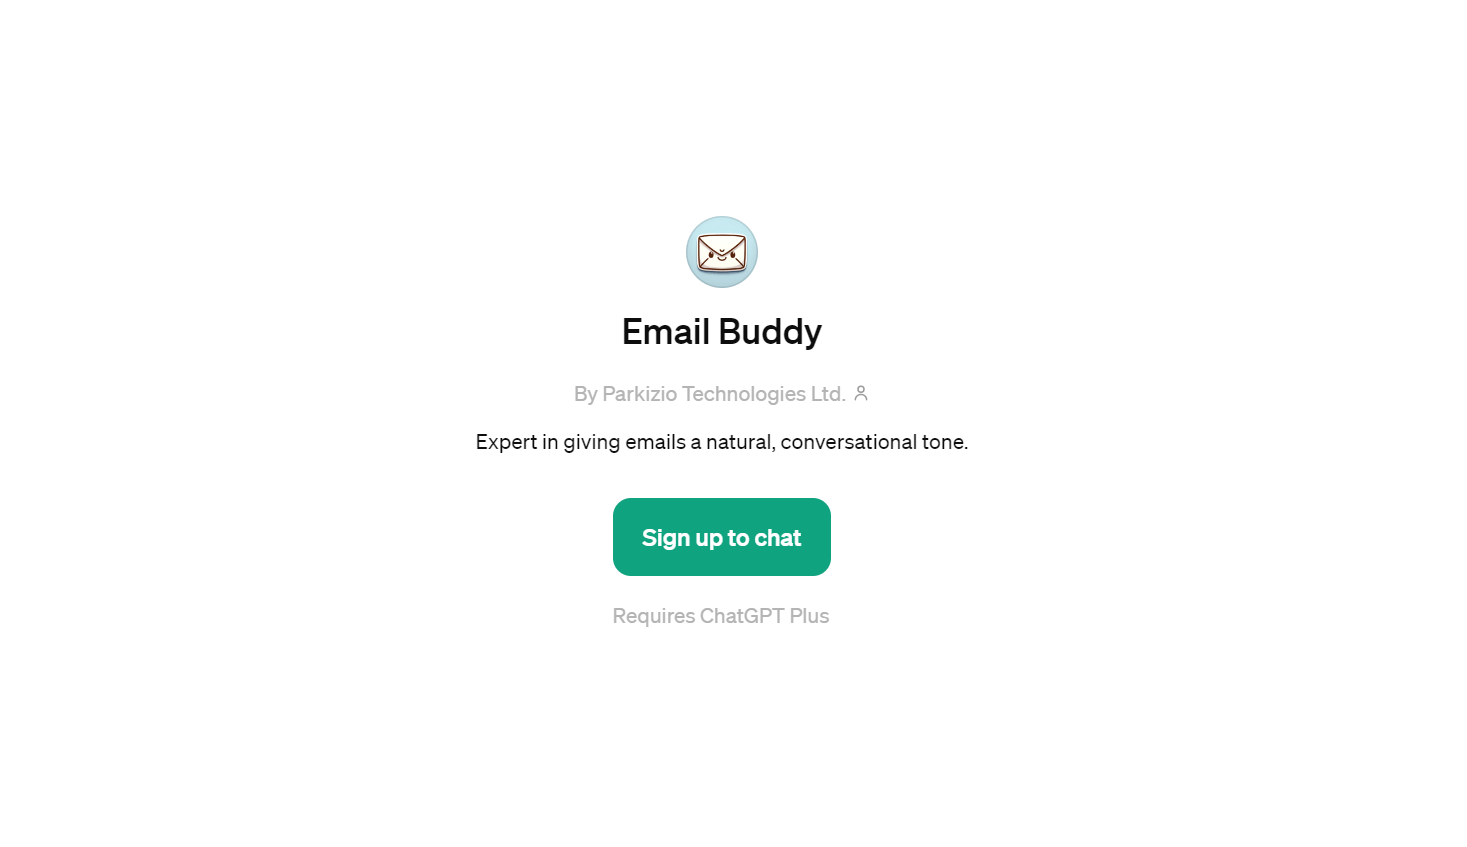 Email Buddy - Craft More Natural-Sounding Emails with Ease